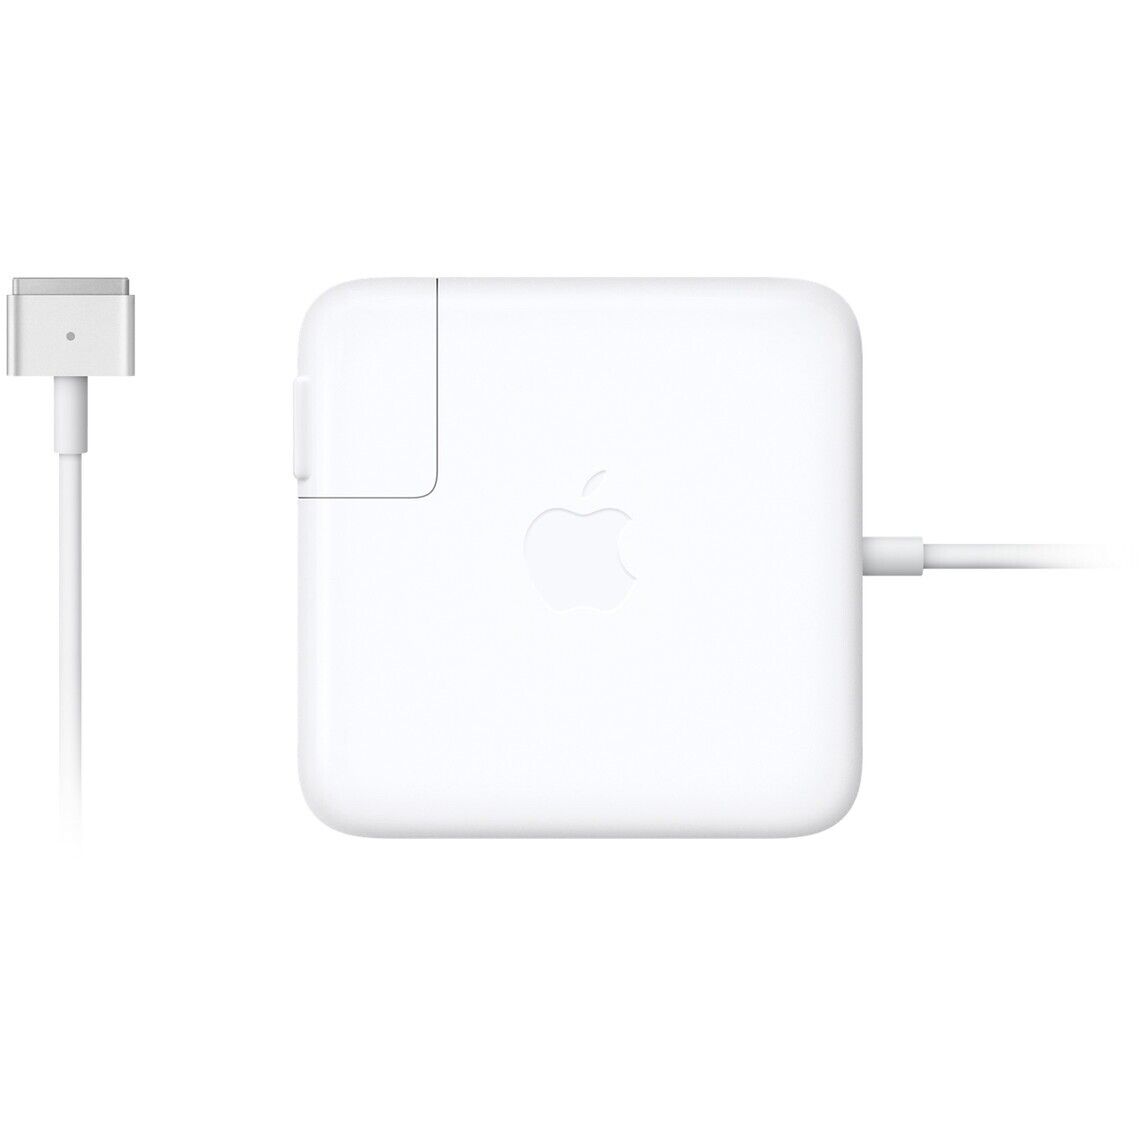 OEM GENUINE APPLE 85W A1424 MAGSAFE 2 POWER ADAPTER CHARGER 2013-15 MACBOOK PRO